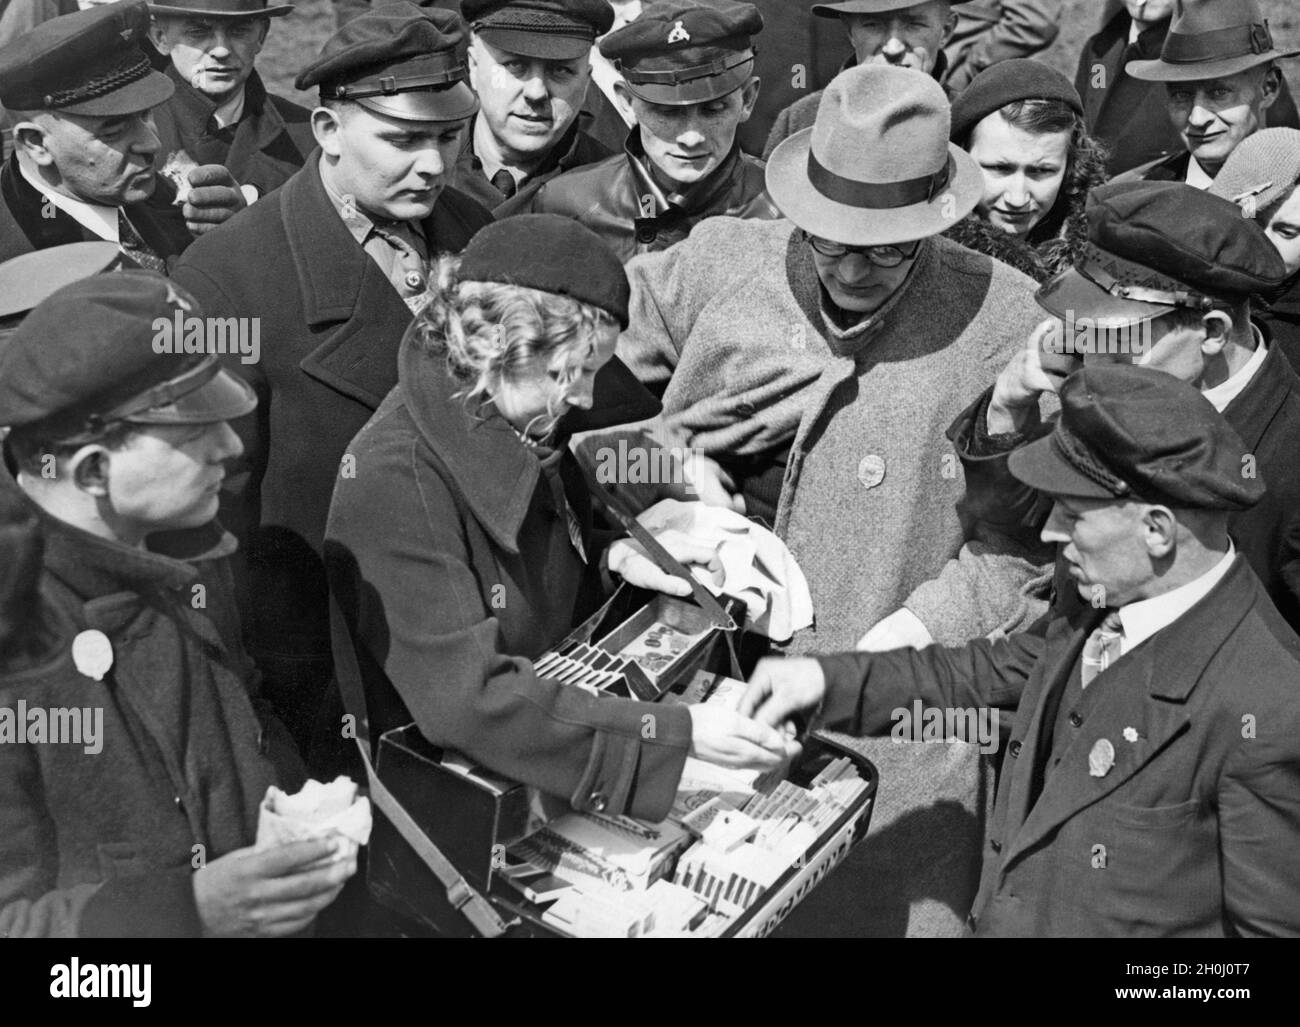 A young woman with a vendor's tray sells cigarettes on 1 May at Tempelhofer Feld in Berlin. (undated photo) [automated translation] Stock Photo